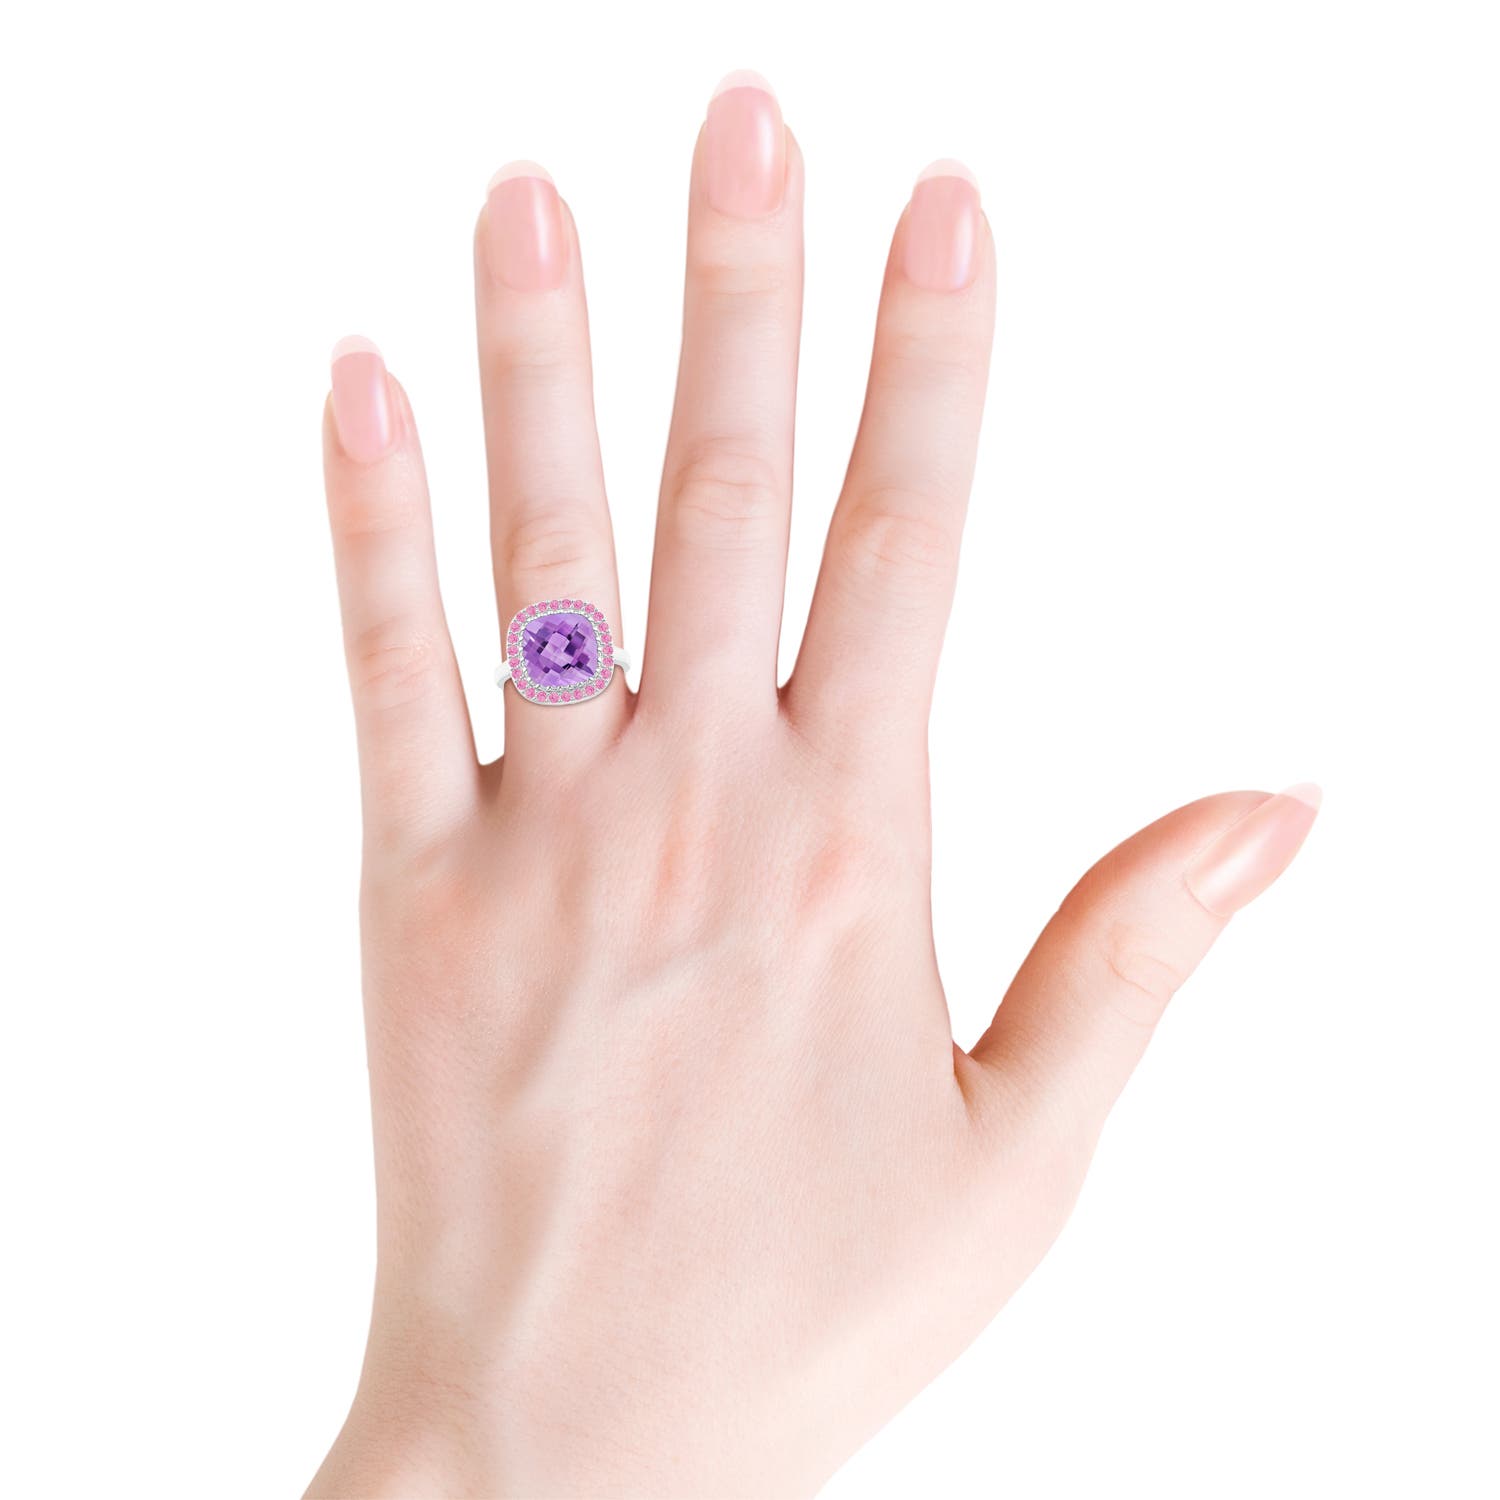 A - Amethyst / 4.65 CT / 14 KT White Gold